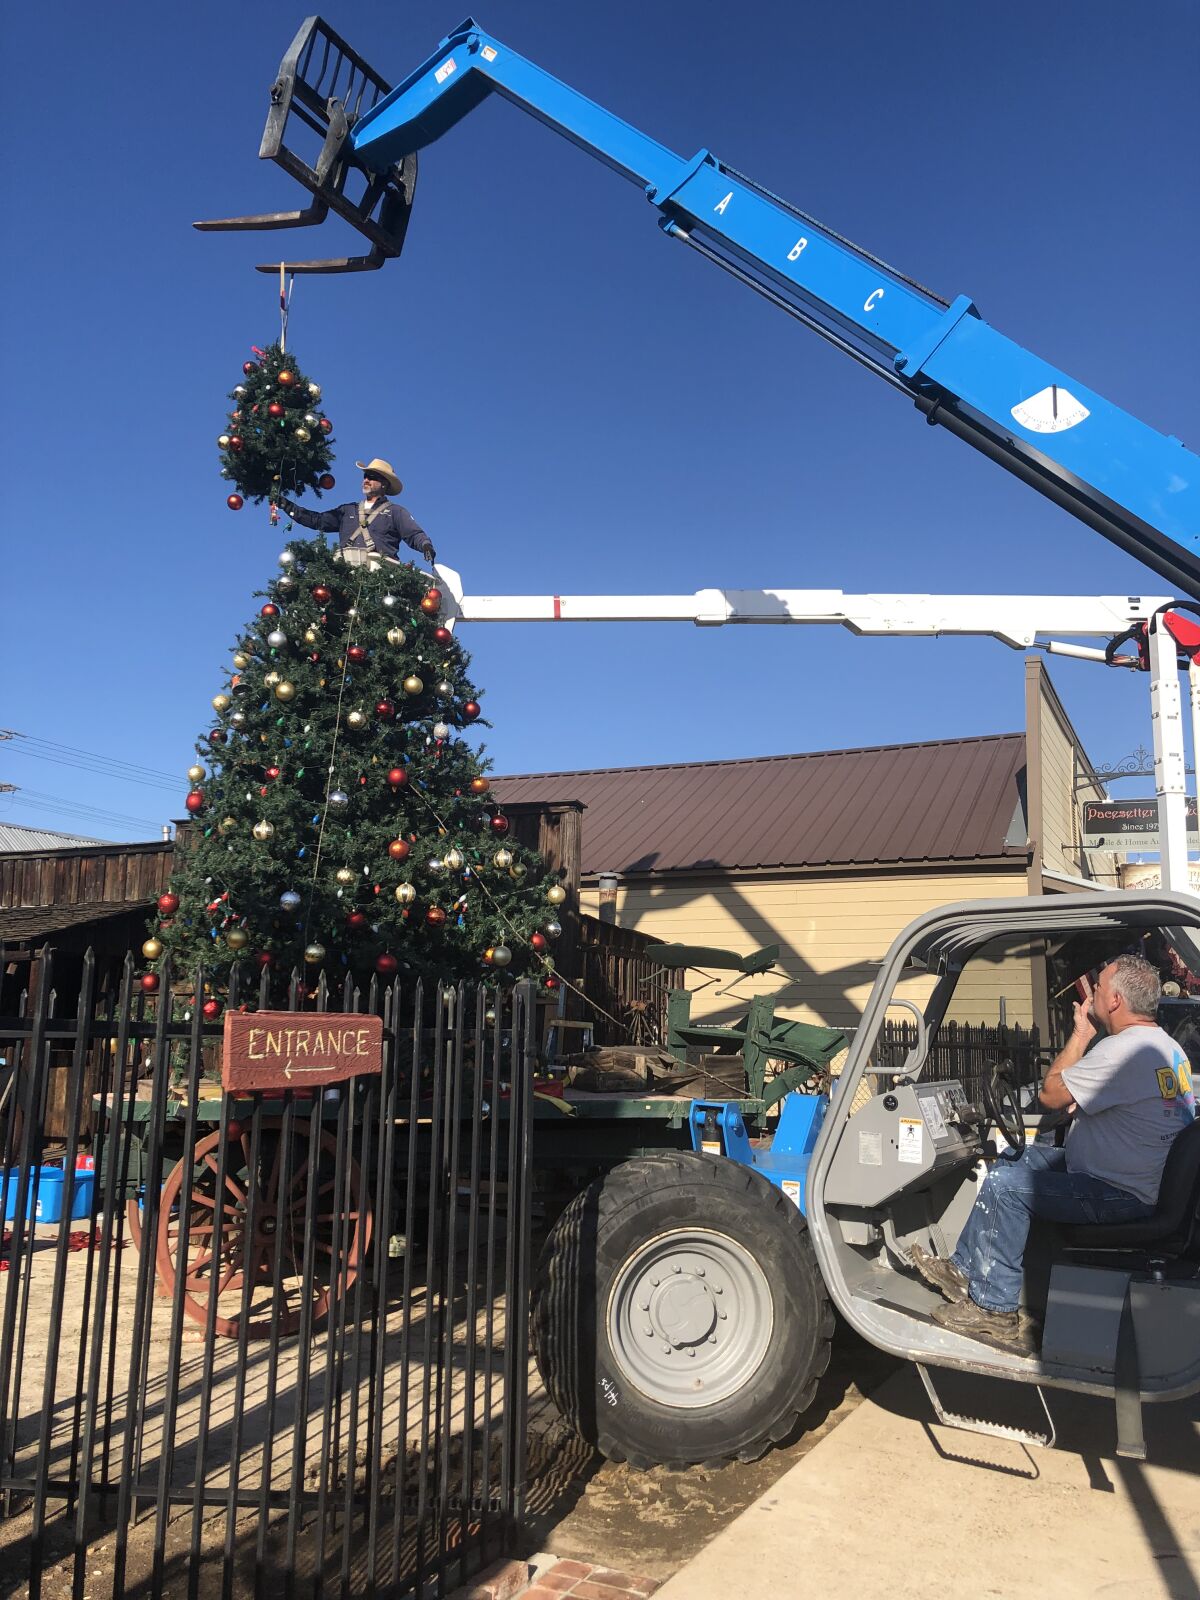 The last section of the Ramona Christmas tree is carefully lowered into place.